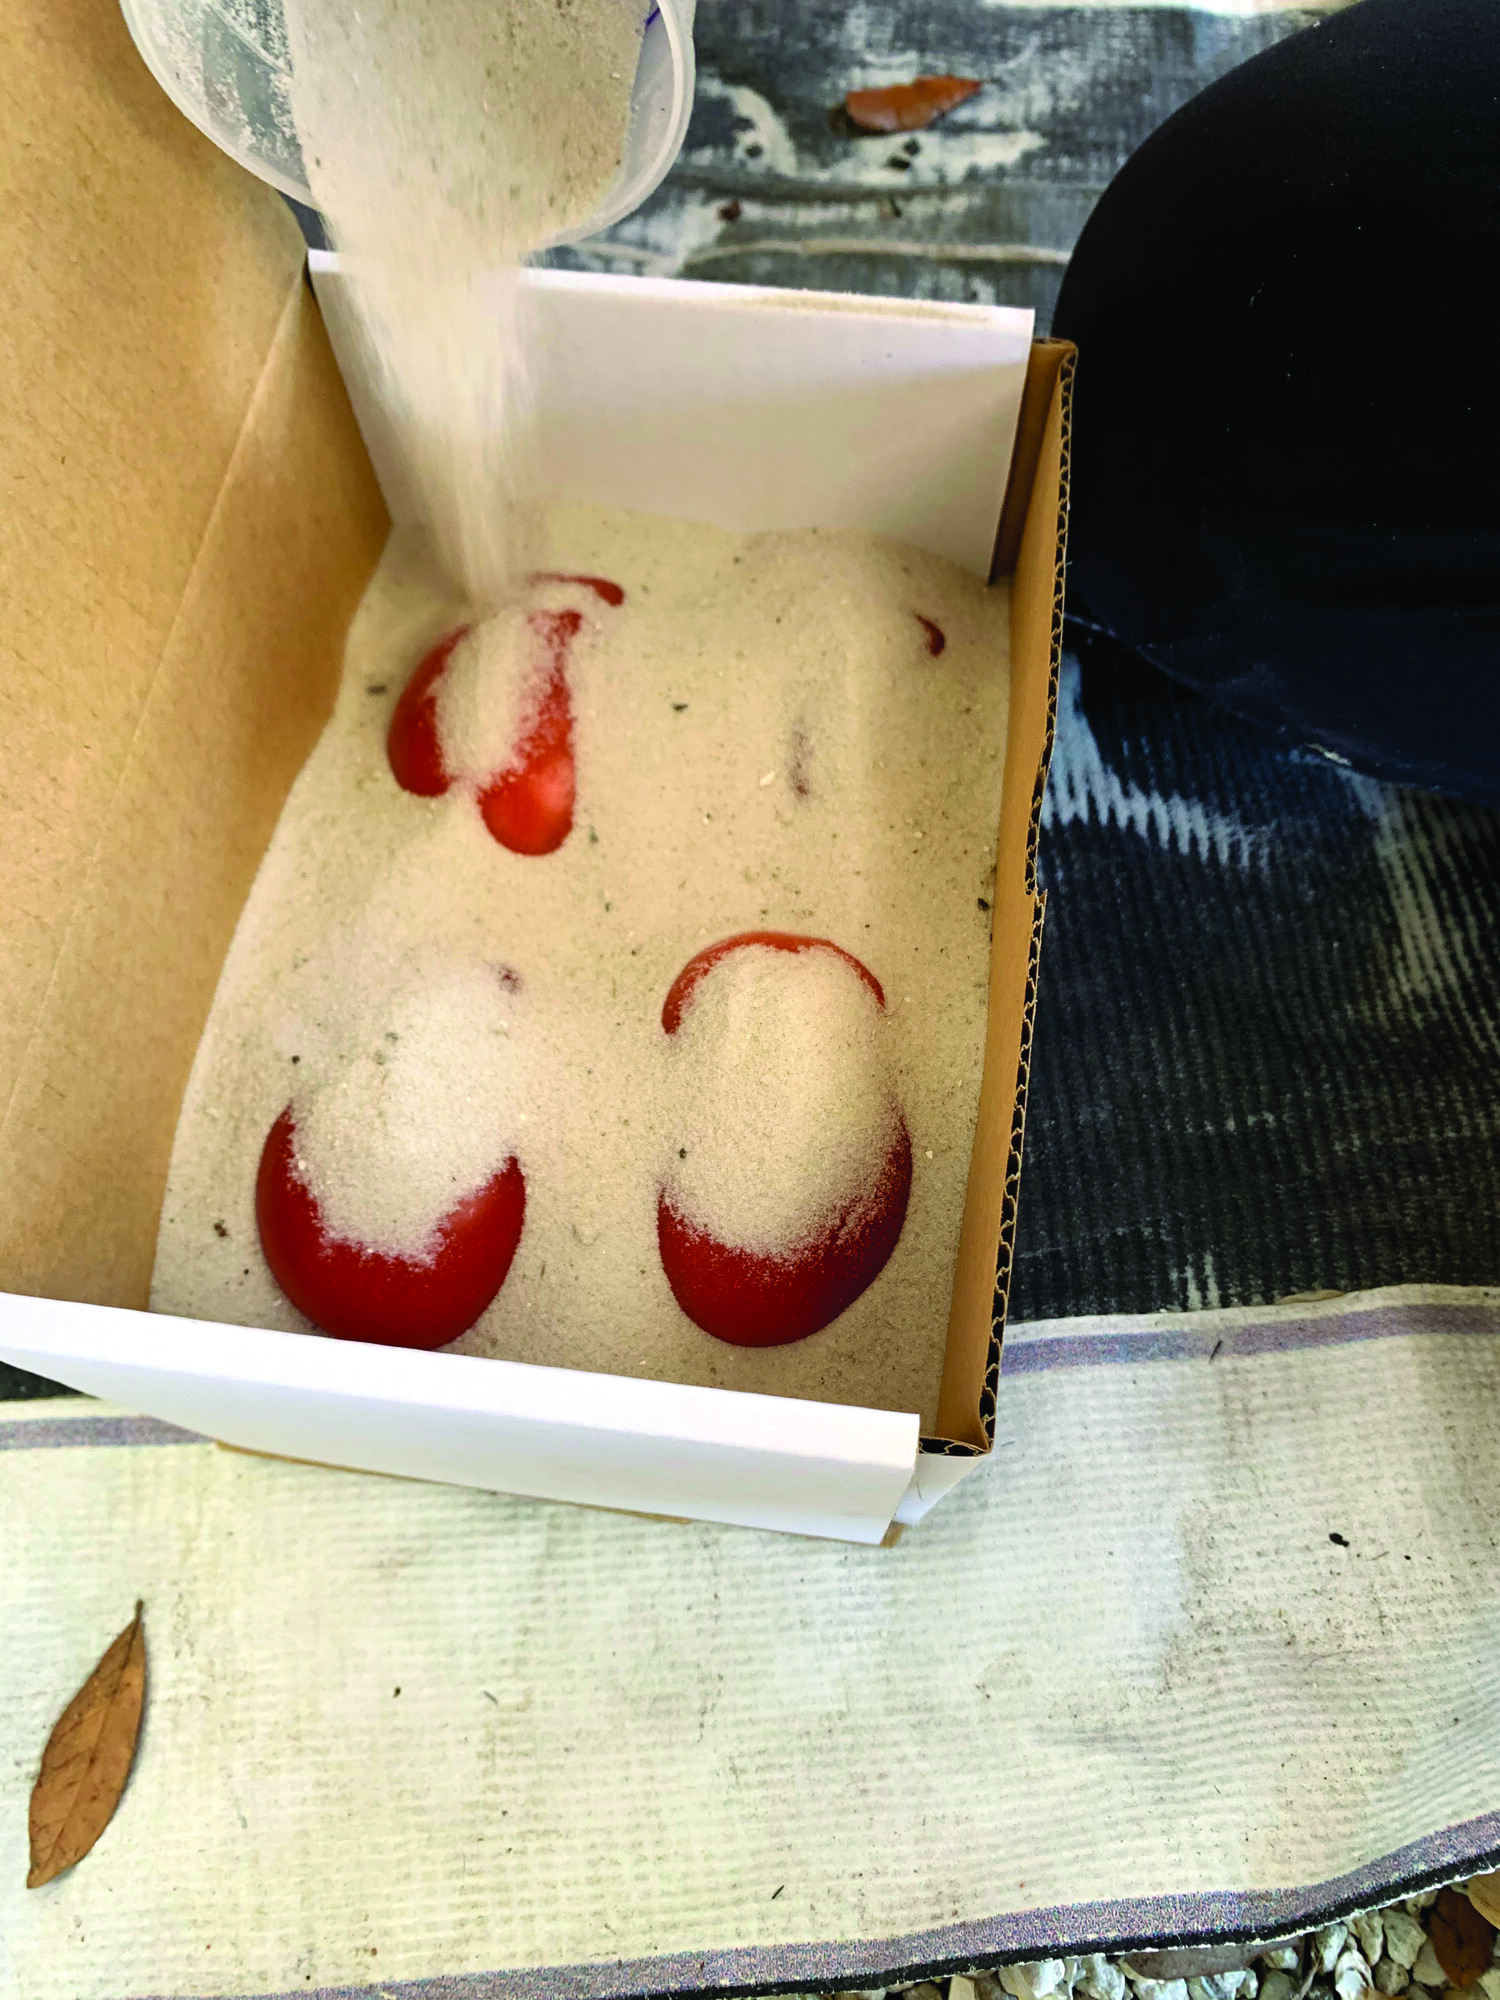 Once a week, the research team opens two boxes to reveal tomatoes buried in sand and in ash. The team will run tests to measure different variables which indicate how well the sand and ash preserve the tomatoes.